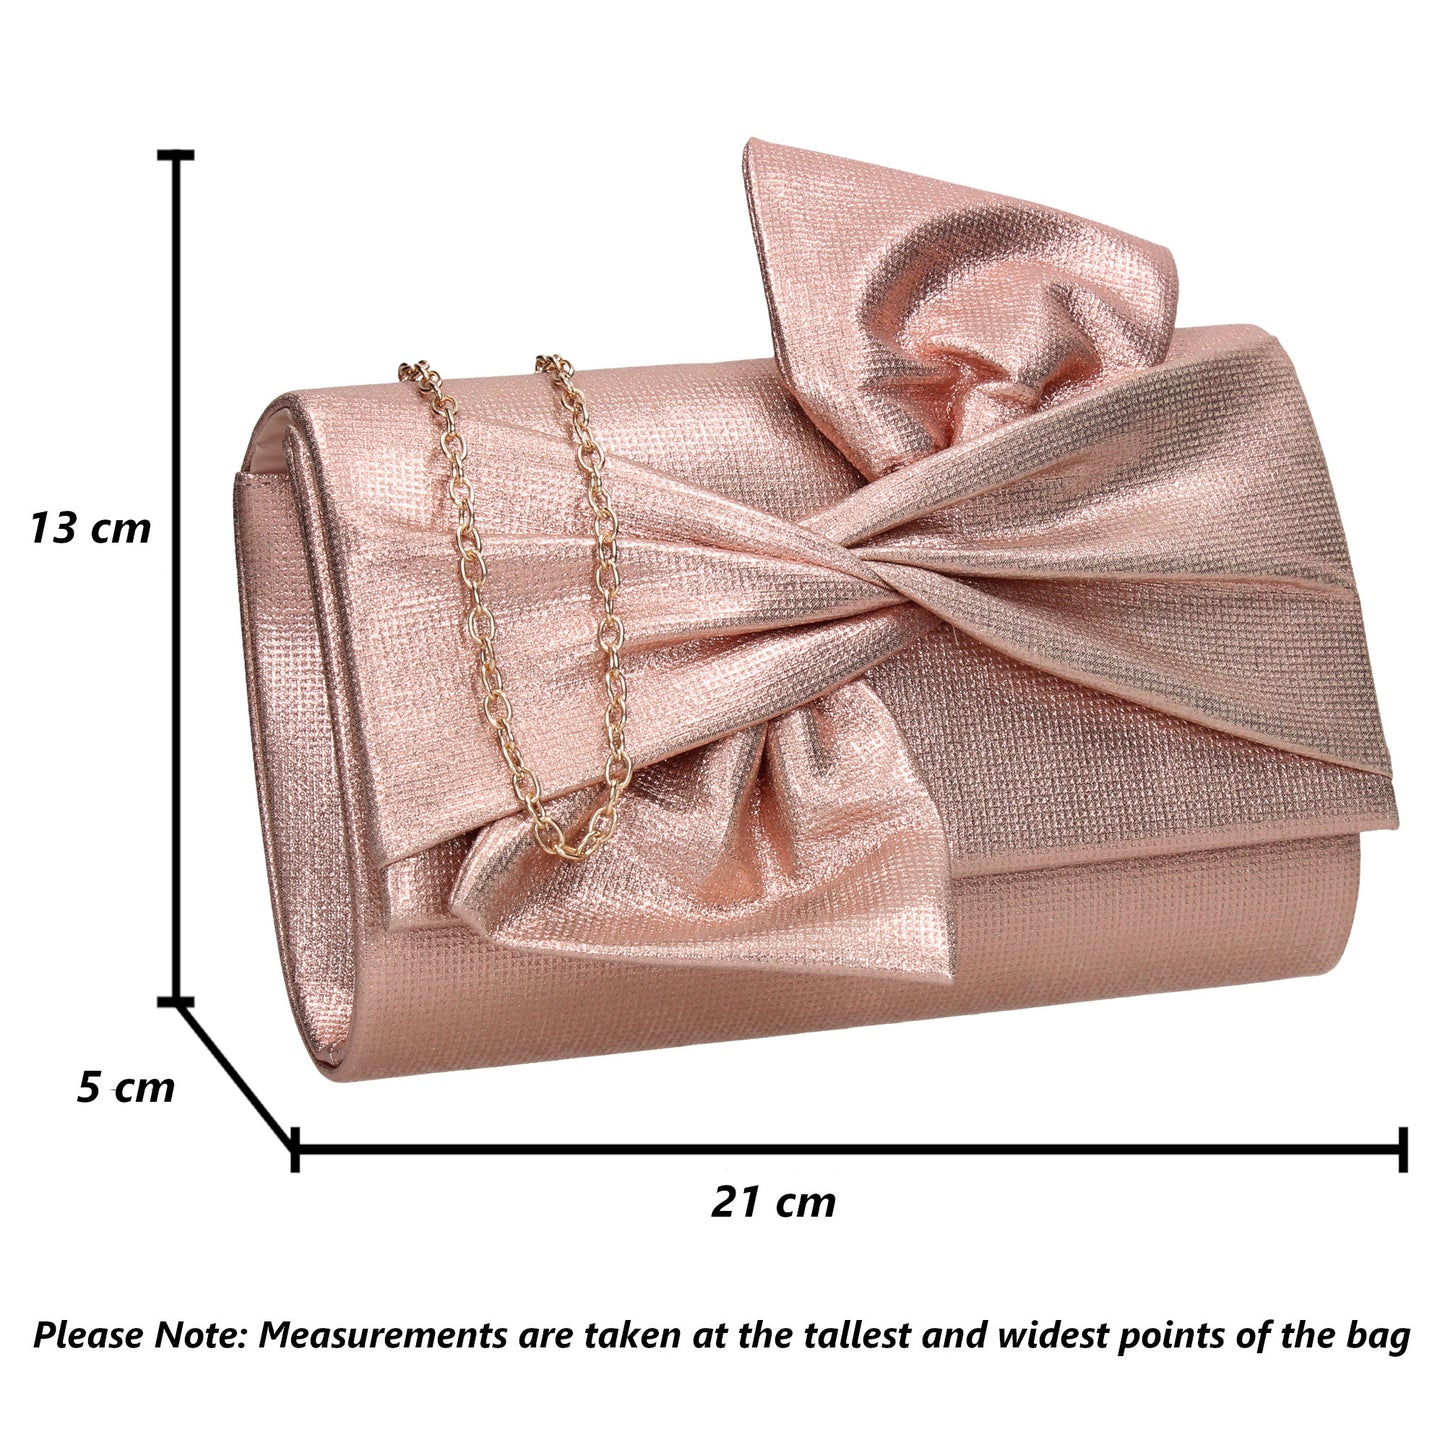 June Bow Style Clutch Bag Champagne